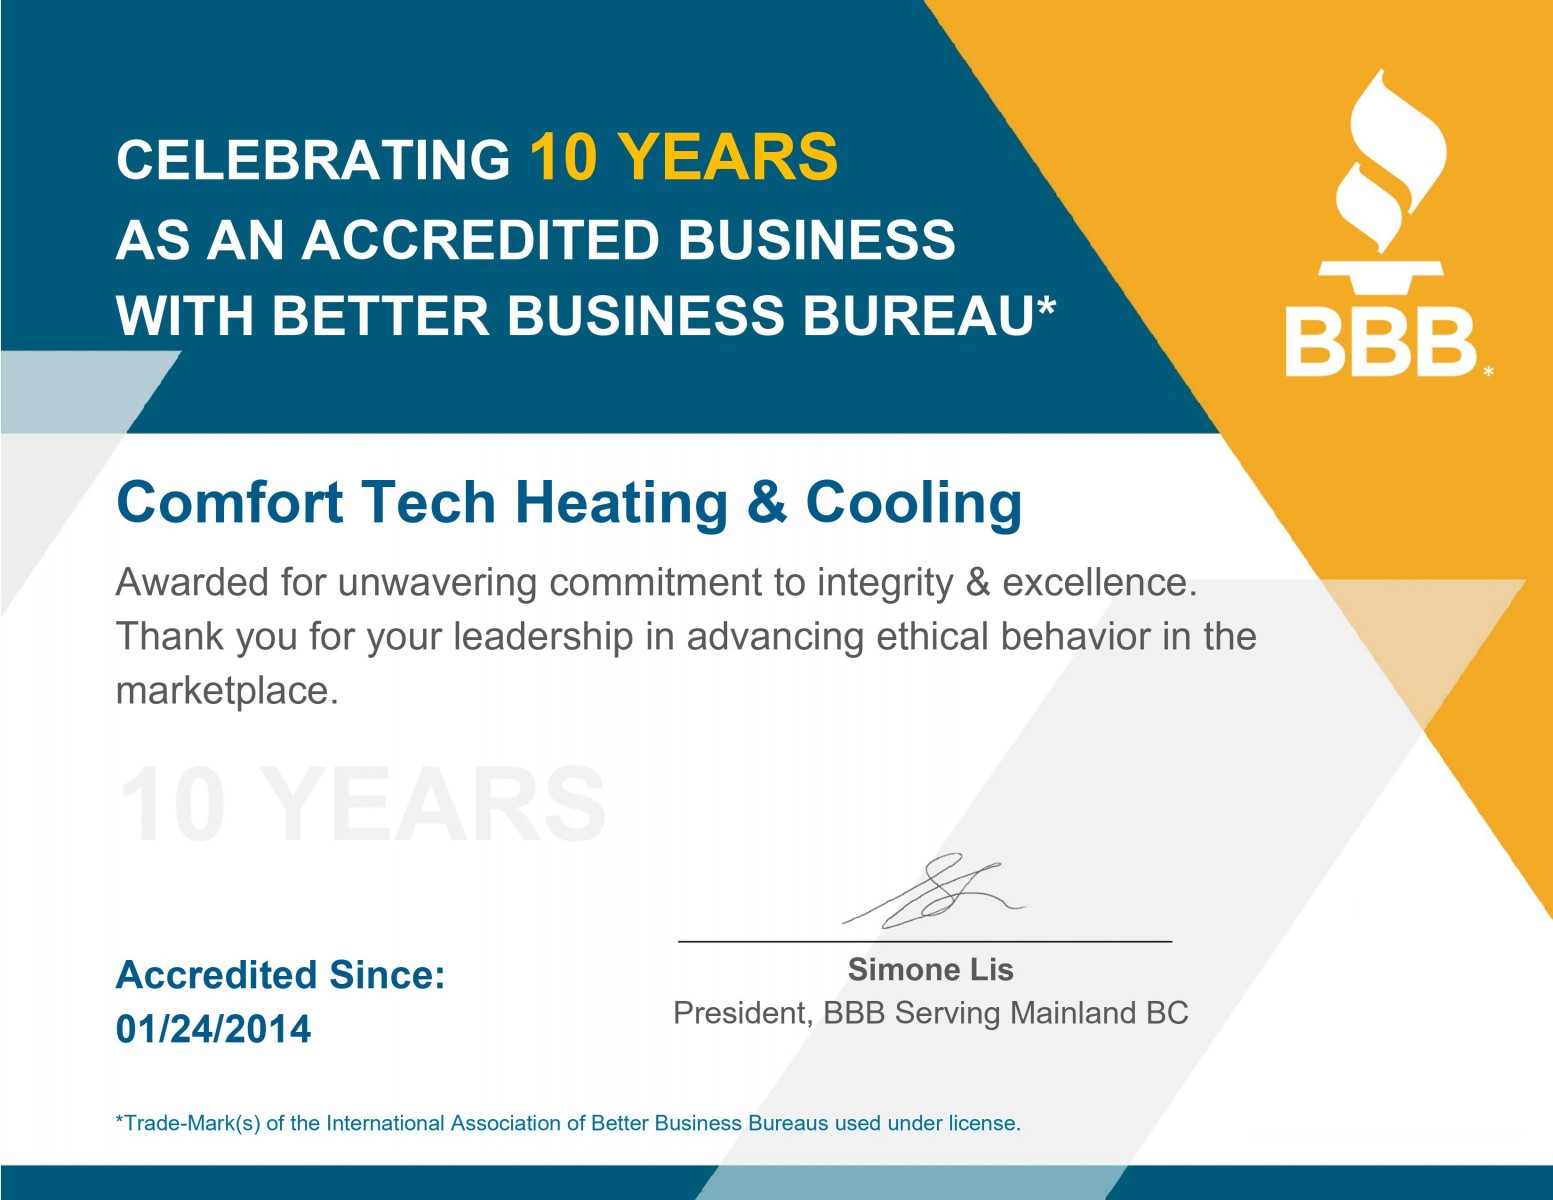 Celebrating 10 Years as an accredited business with BBB